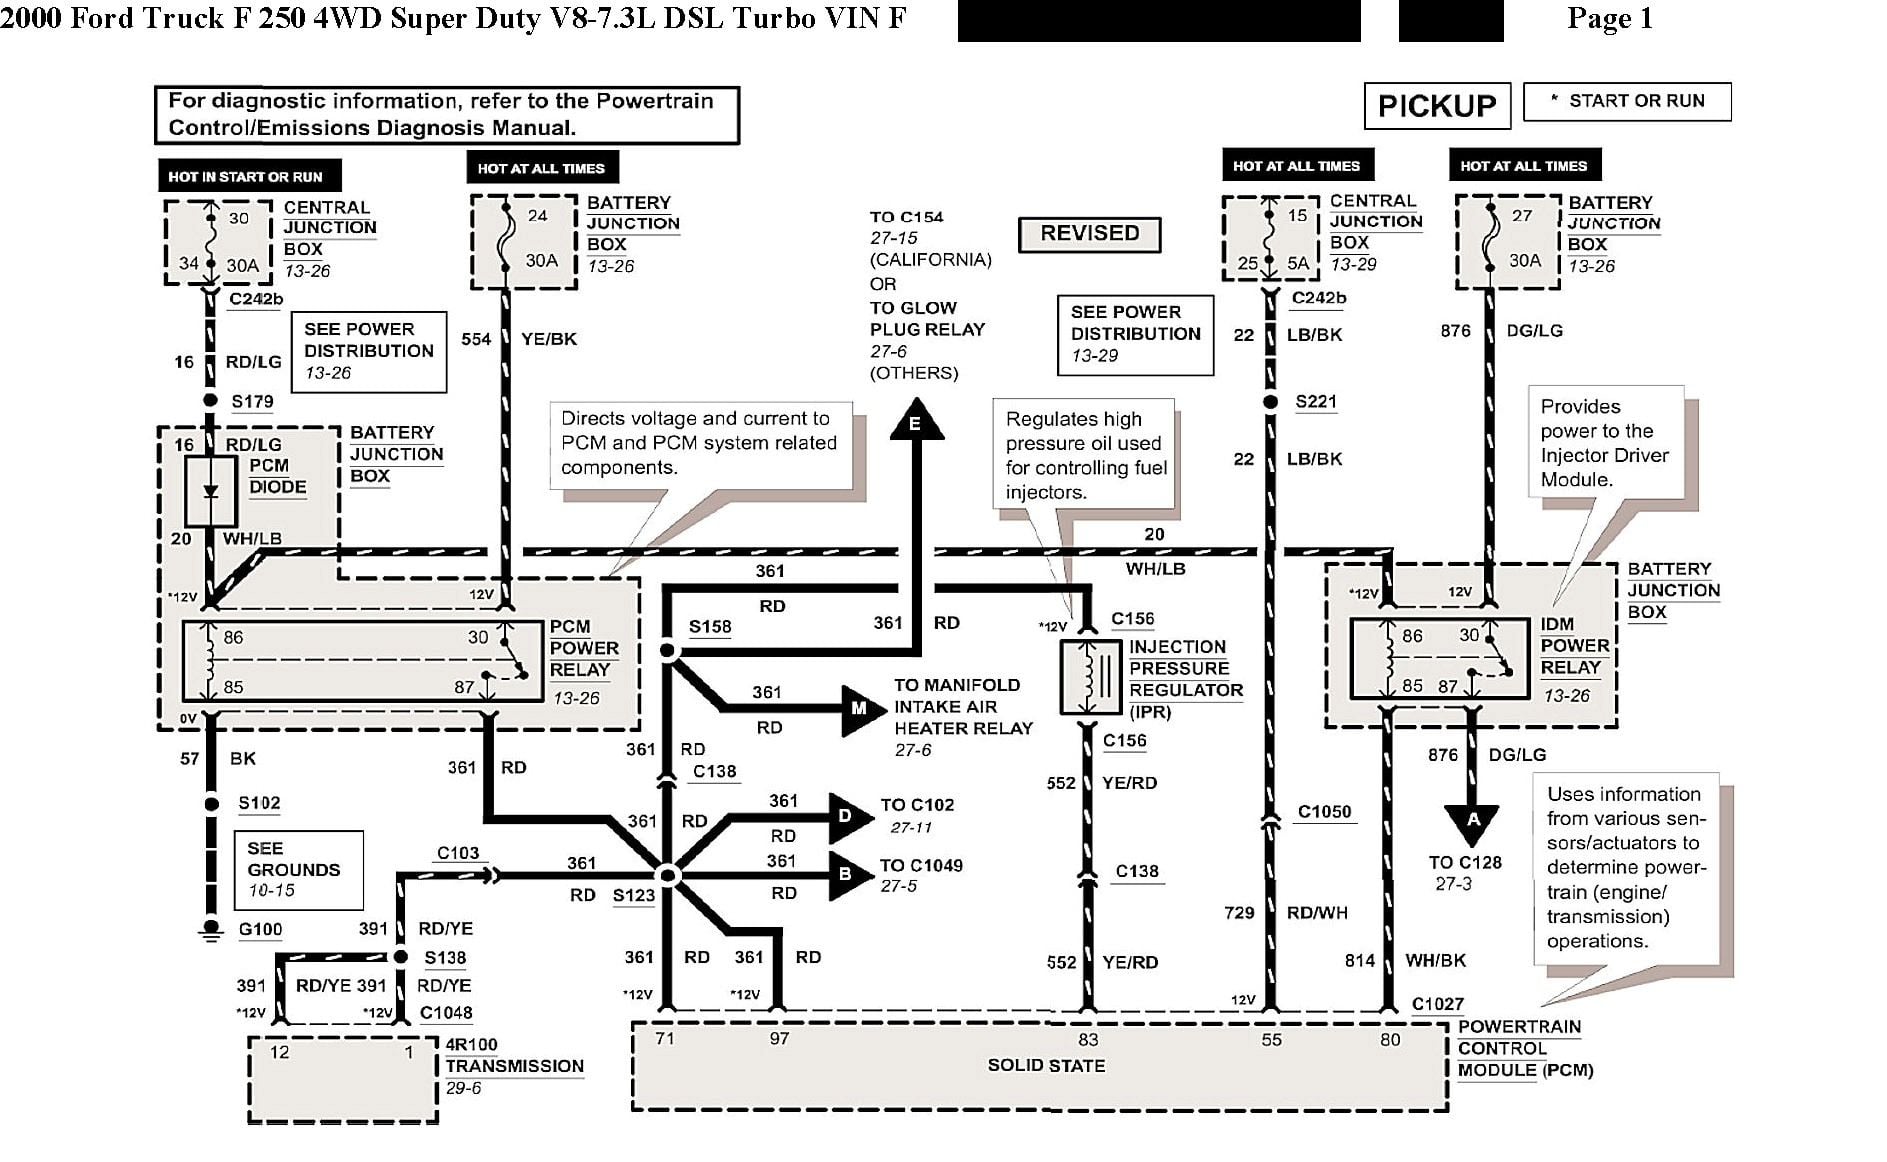 Need Ipr Wiring Info-diagram  Quickly Please  2000